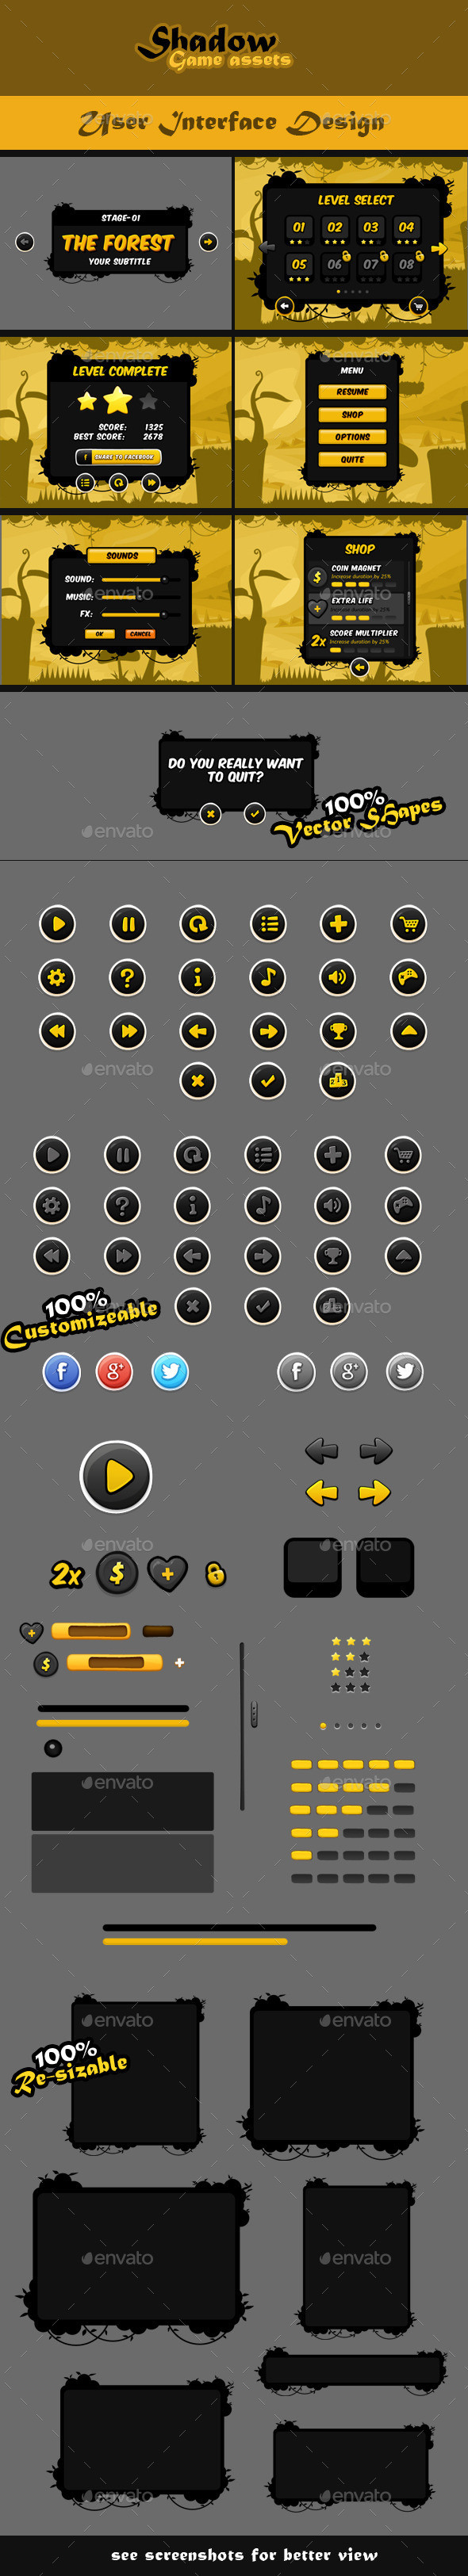 Shadow game asset gui icon and button designs preview